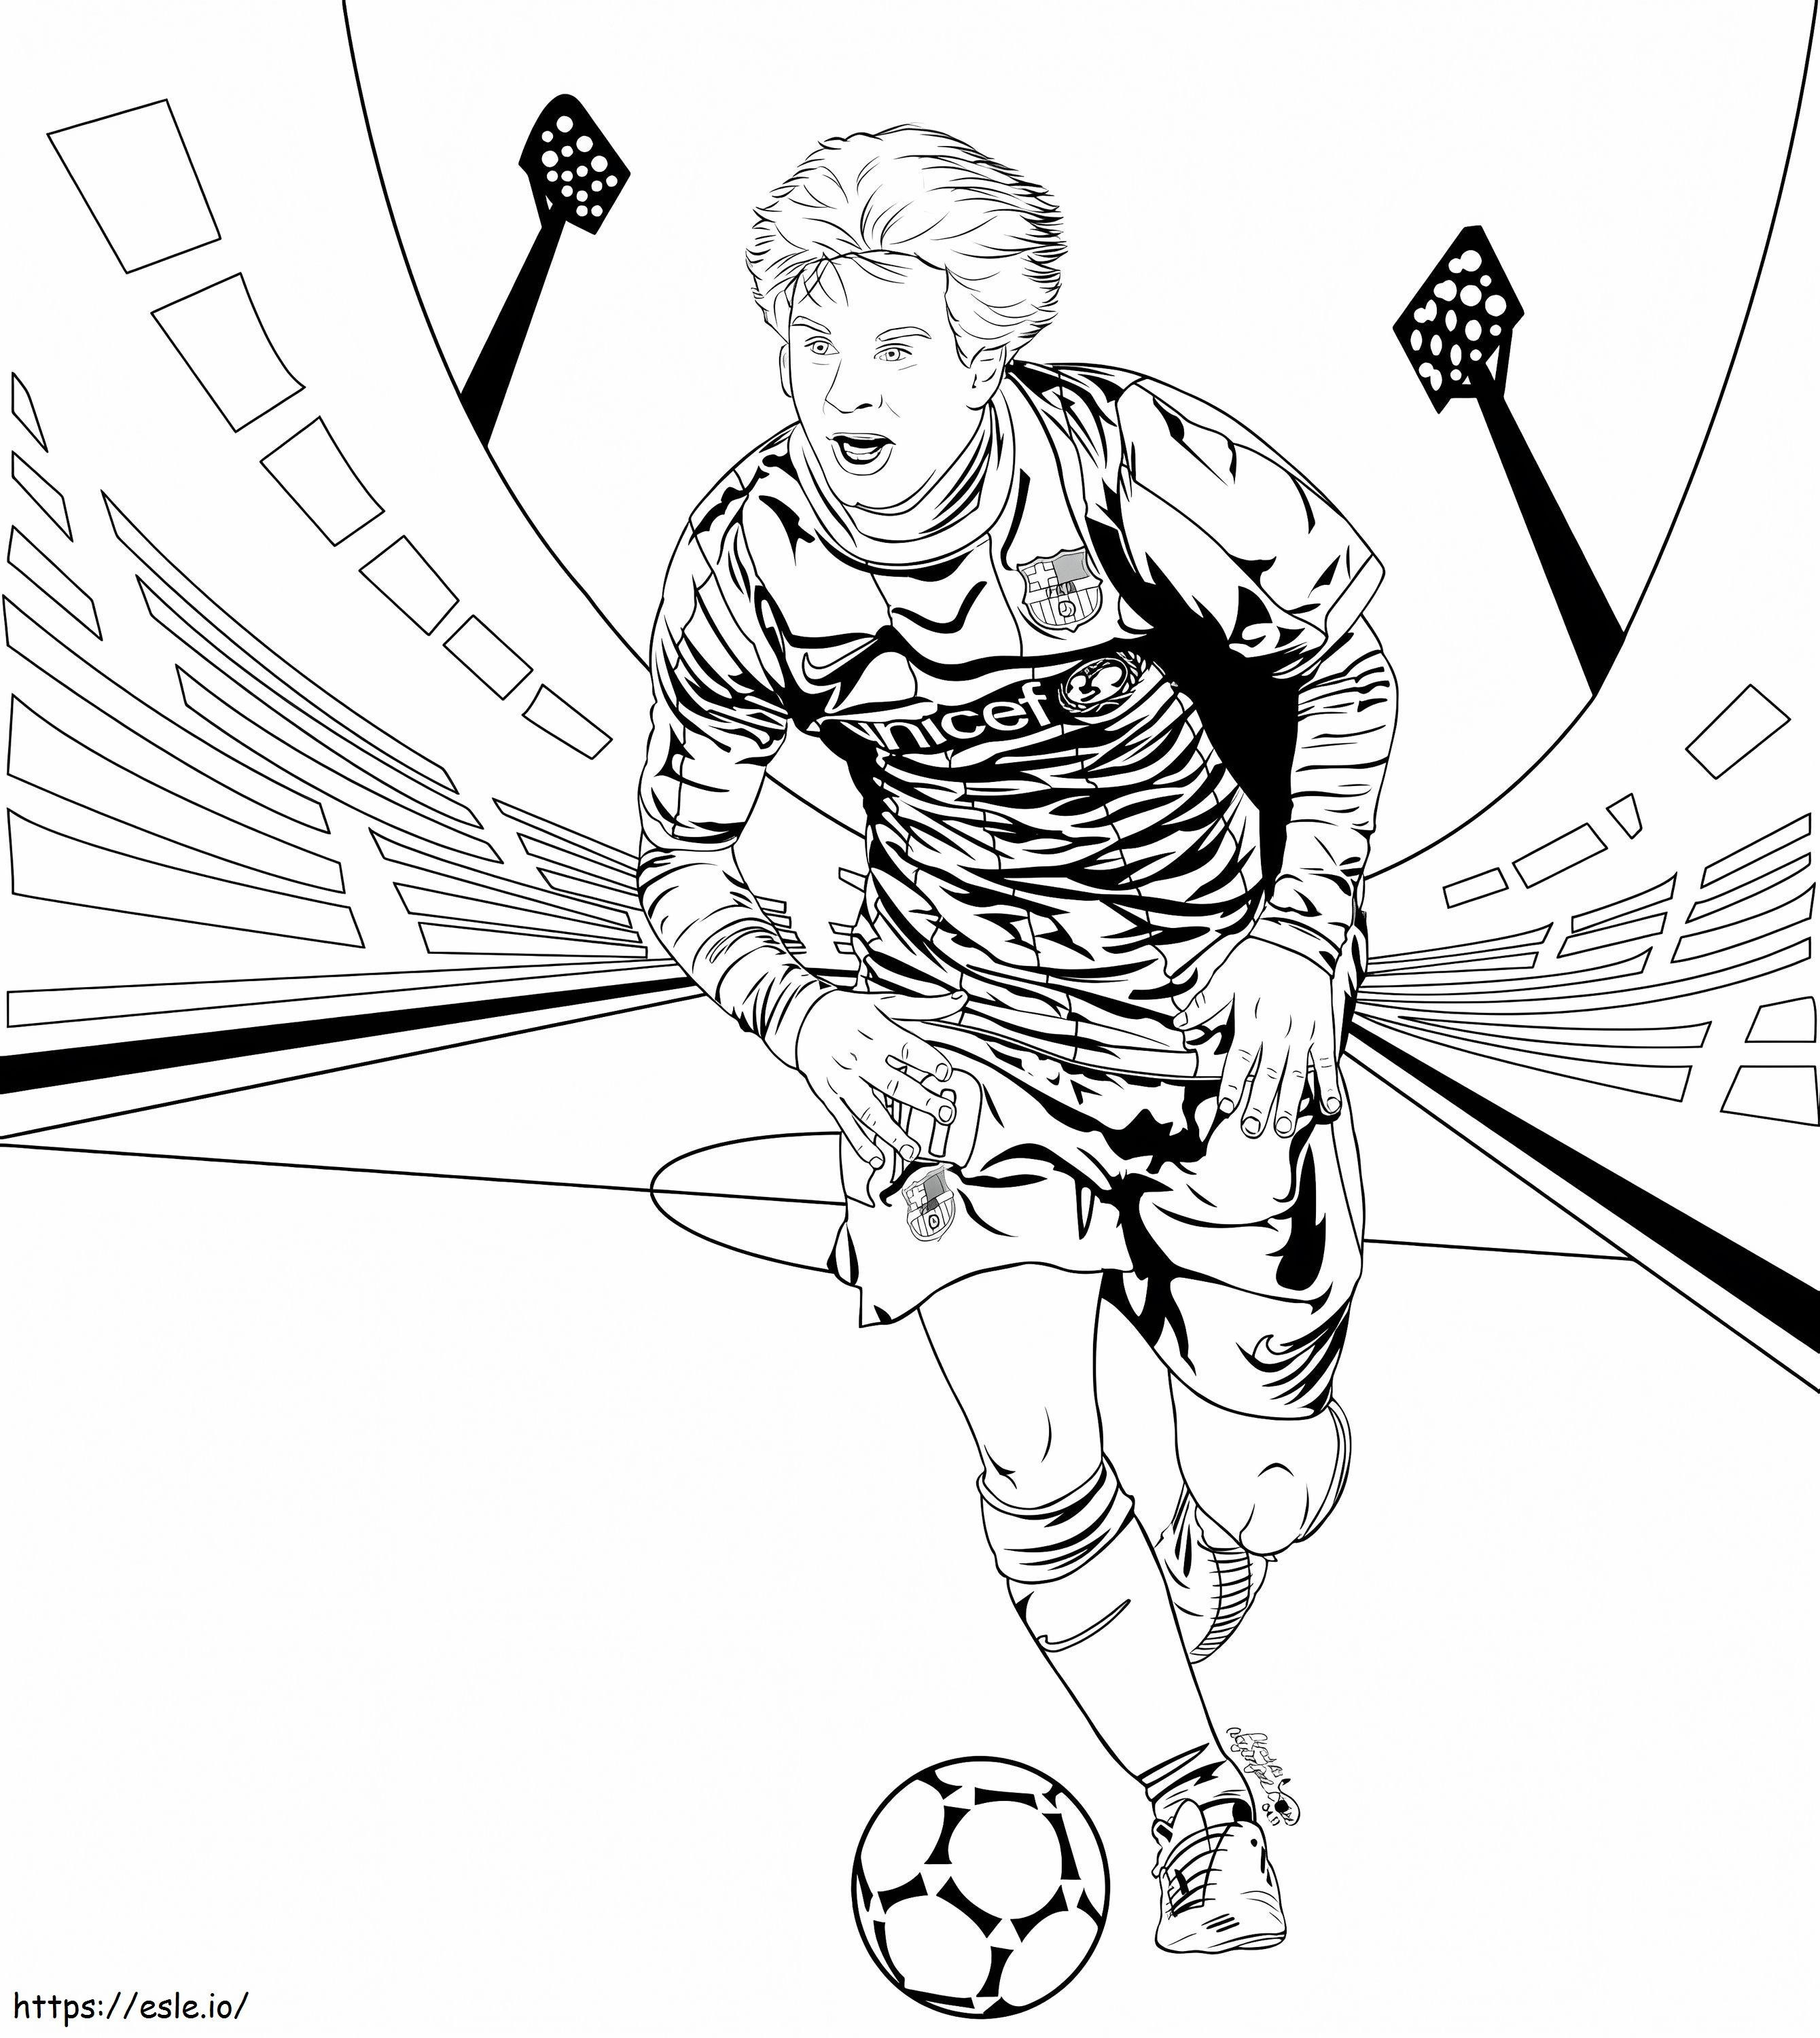 Lionel Messi Football Player coloring page